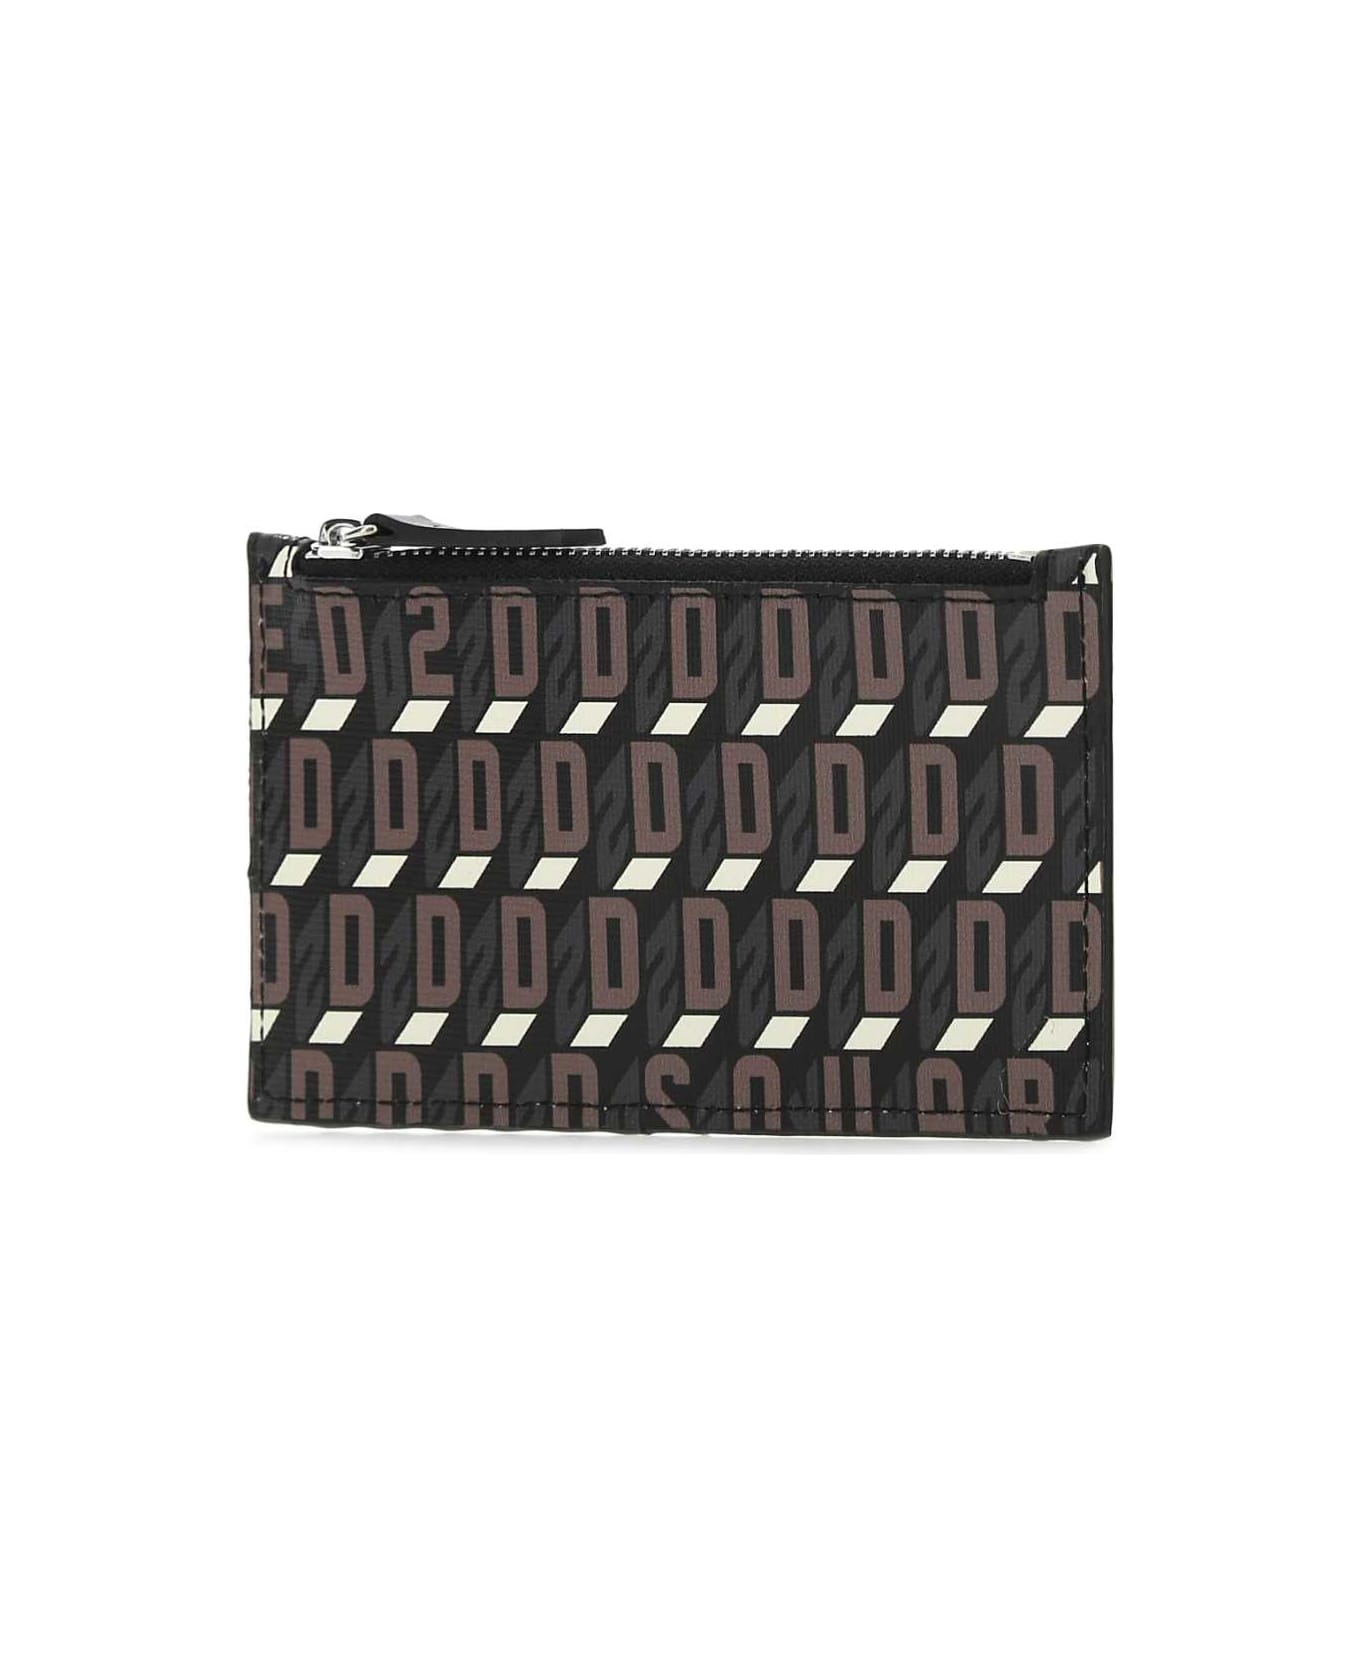 Dsquared2 Printed Canvas Card Holder - 5080 財布